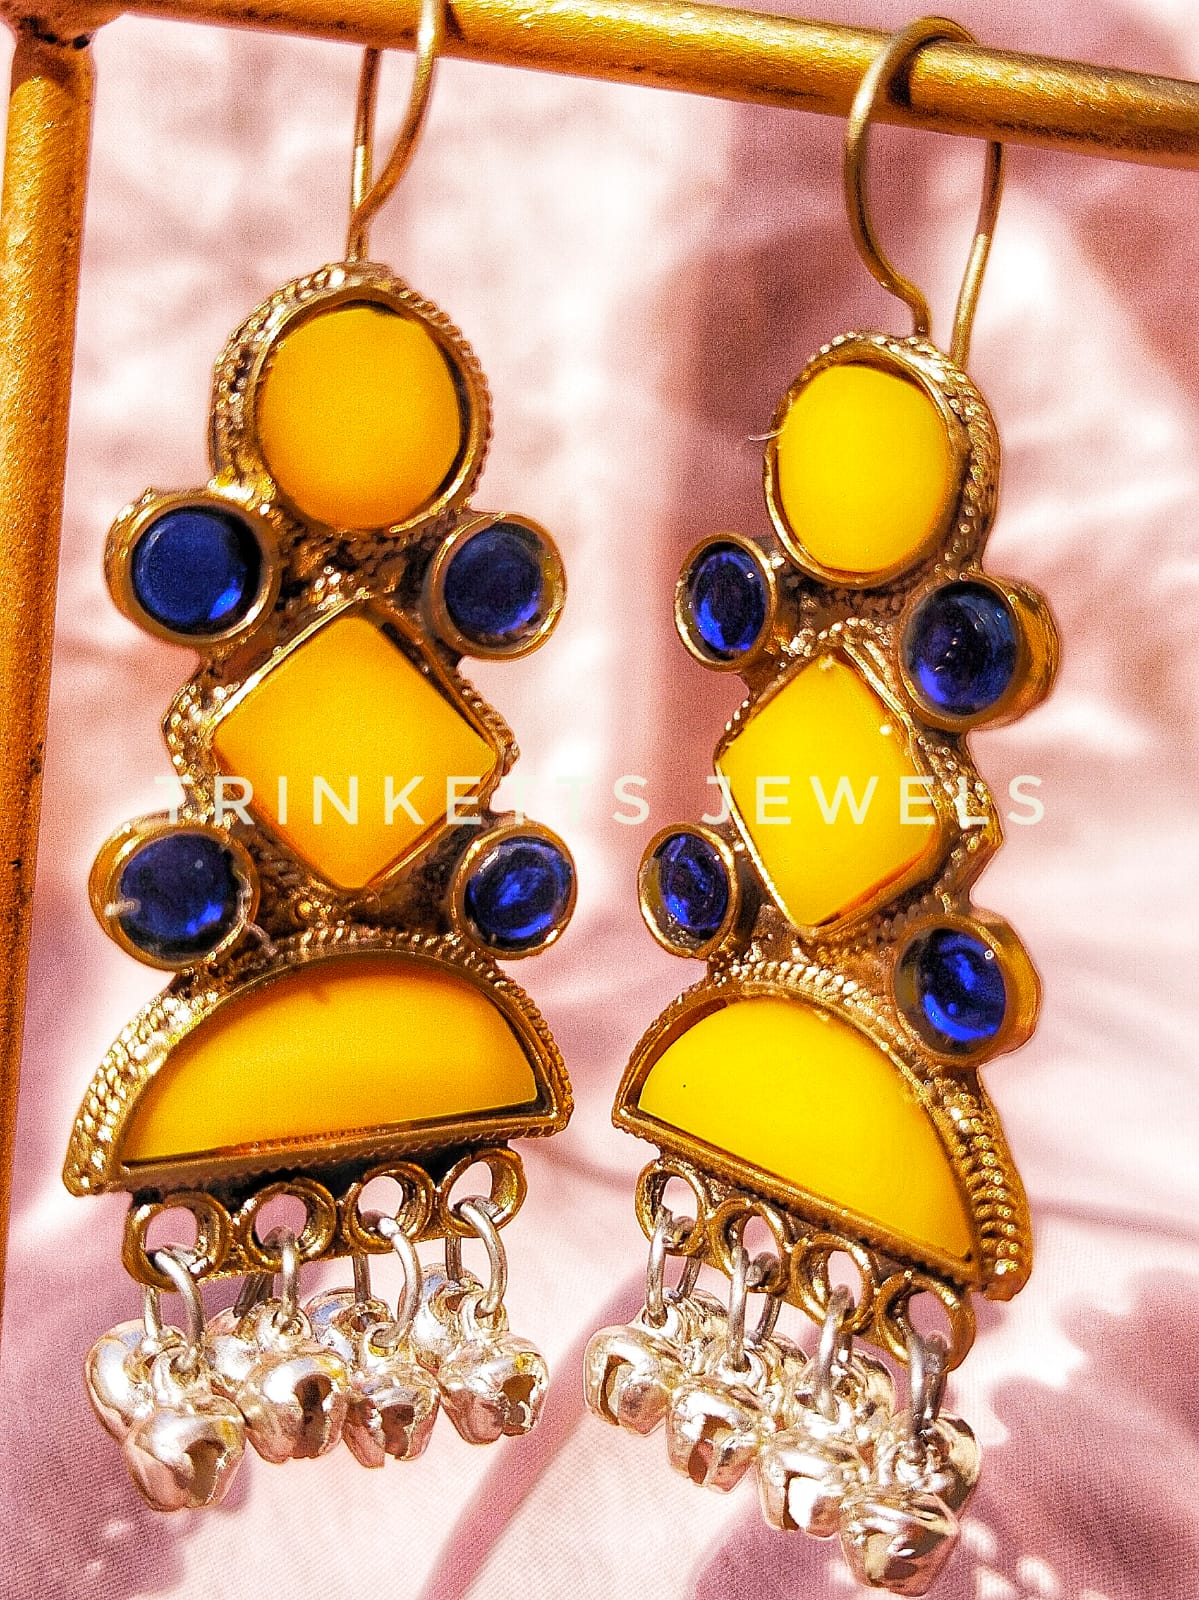 Elegant Afghani earrings featuring yellow matte stones in circle, diamond, and semi-circle shapes, adorned with blue crystal accents and a row of ghungroos in a semi-circle. Available in dazzling golden polish.